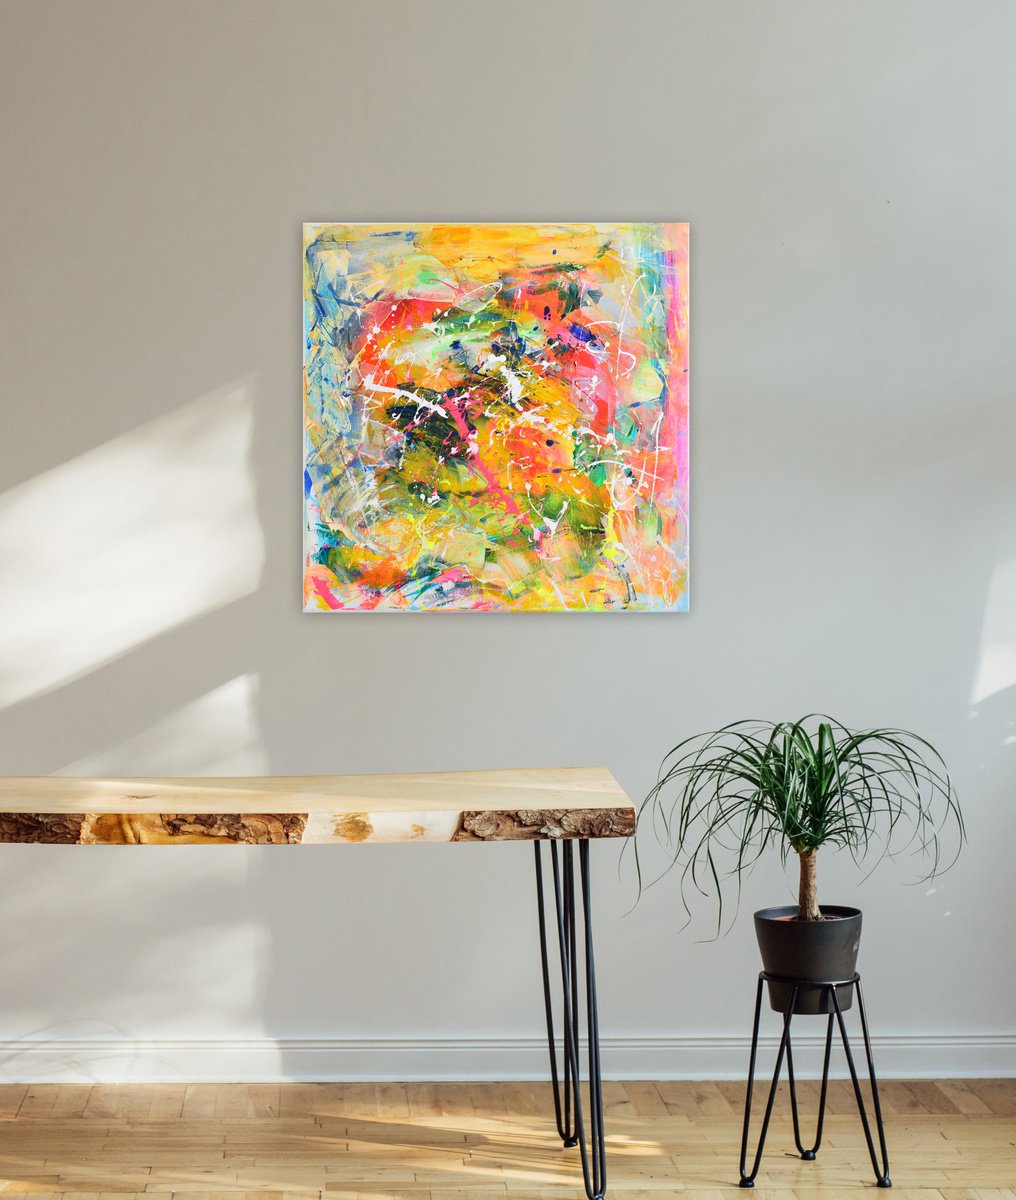 Beach Party 50x50cm / 19 x 19 / colorful abstract painting (2020) by Sebastian Merk